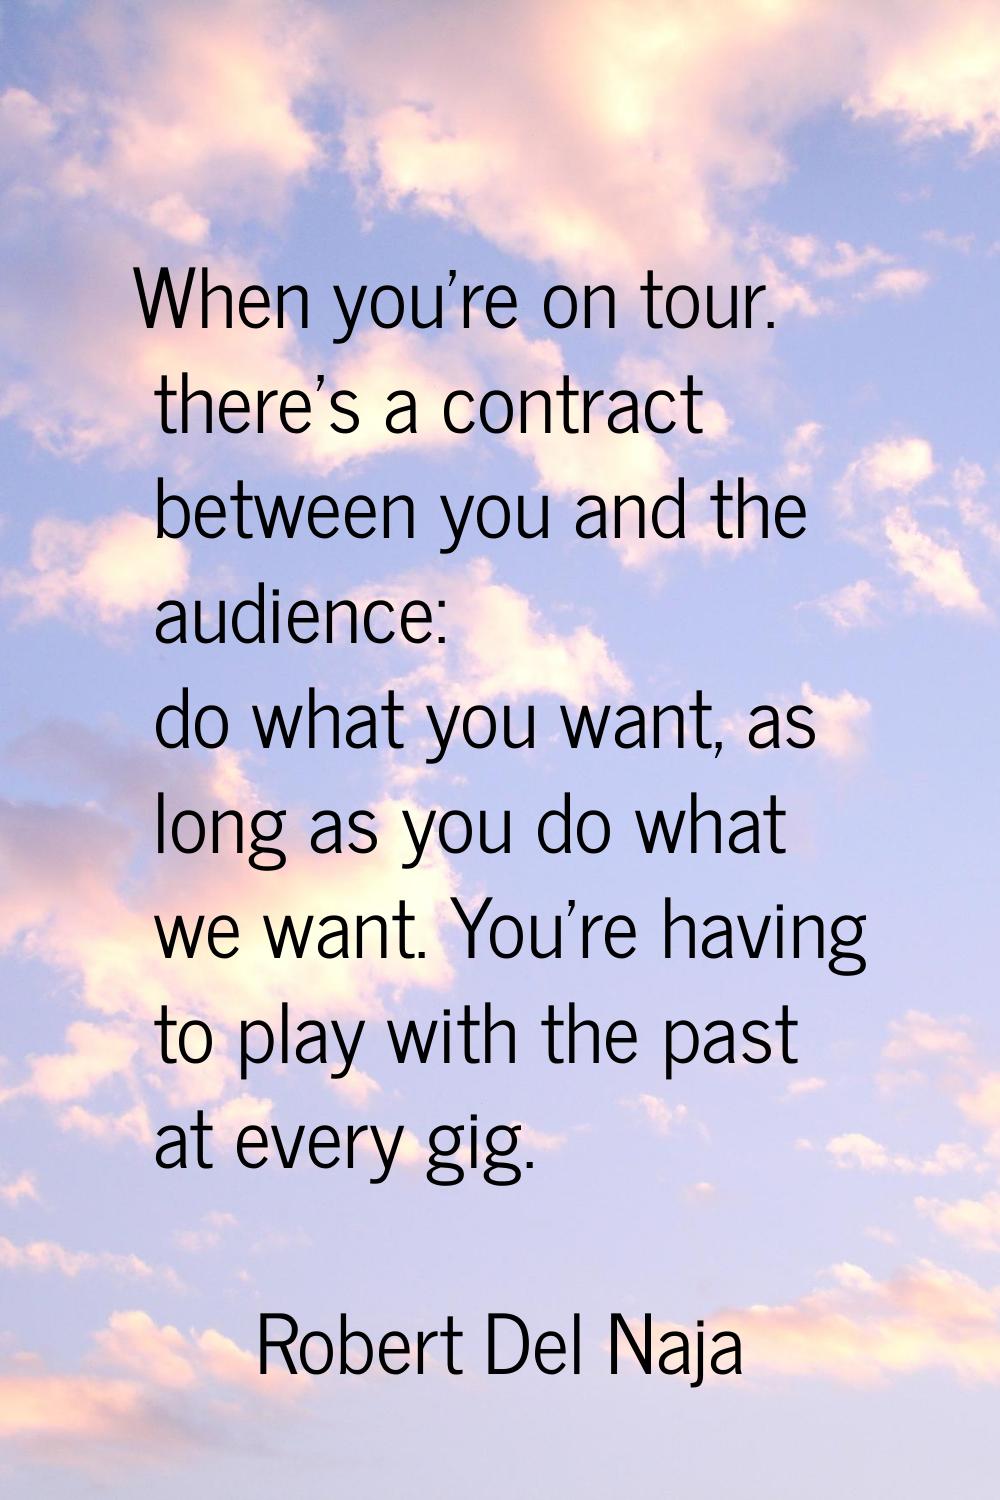 When you’re on tour. there’s a contract between you and the audience: do what you want, as long as 